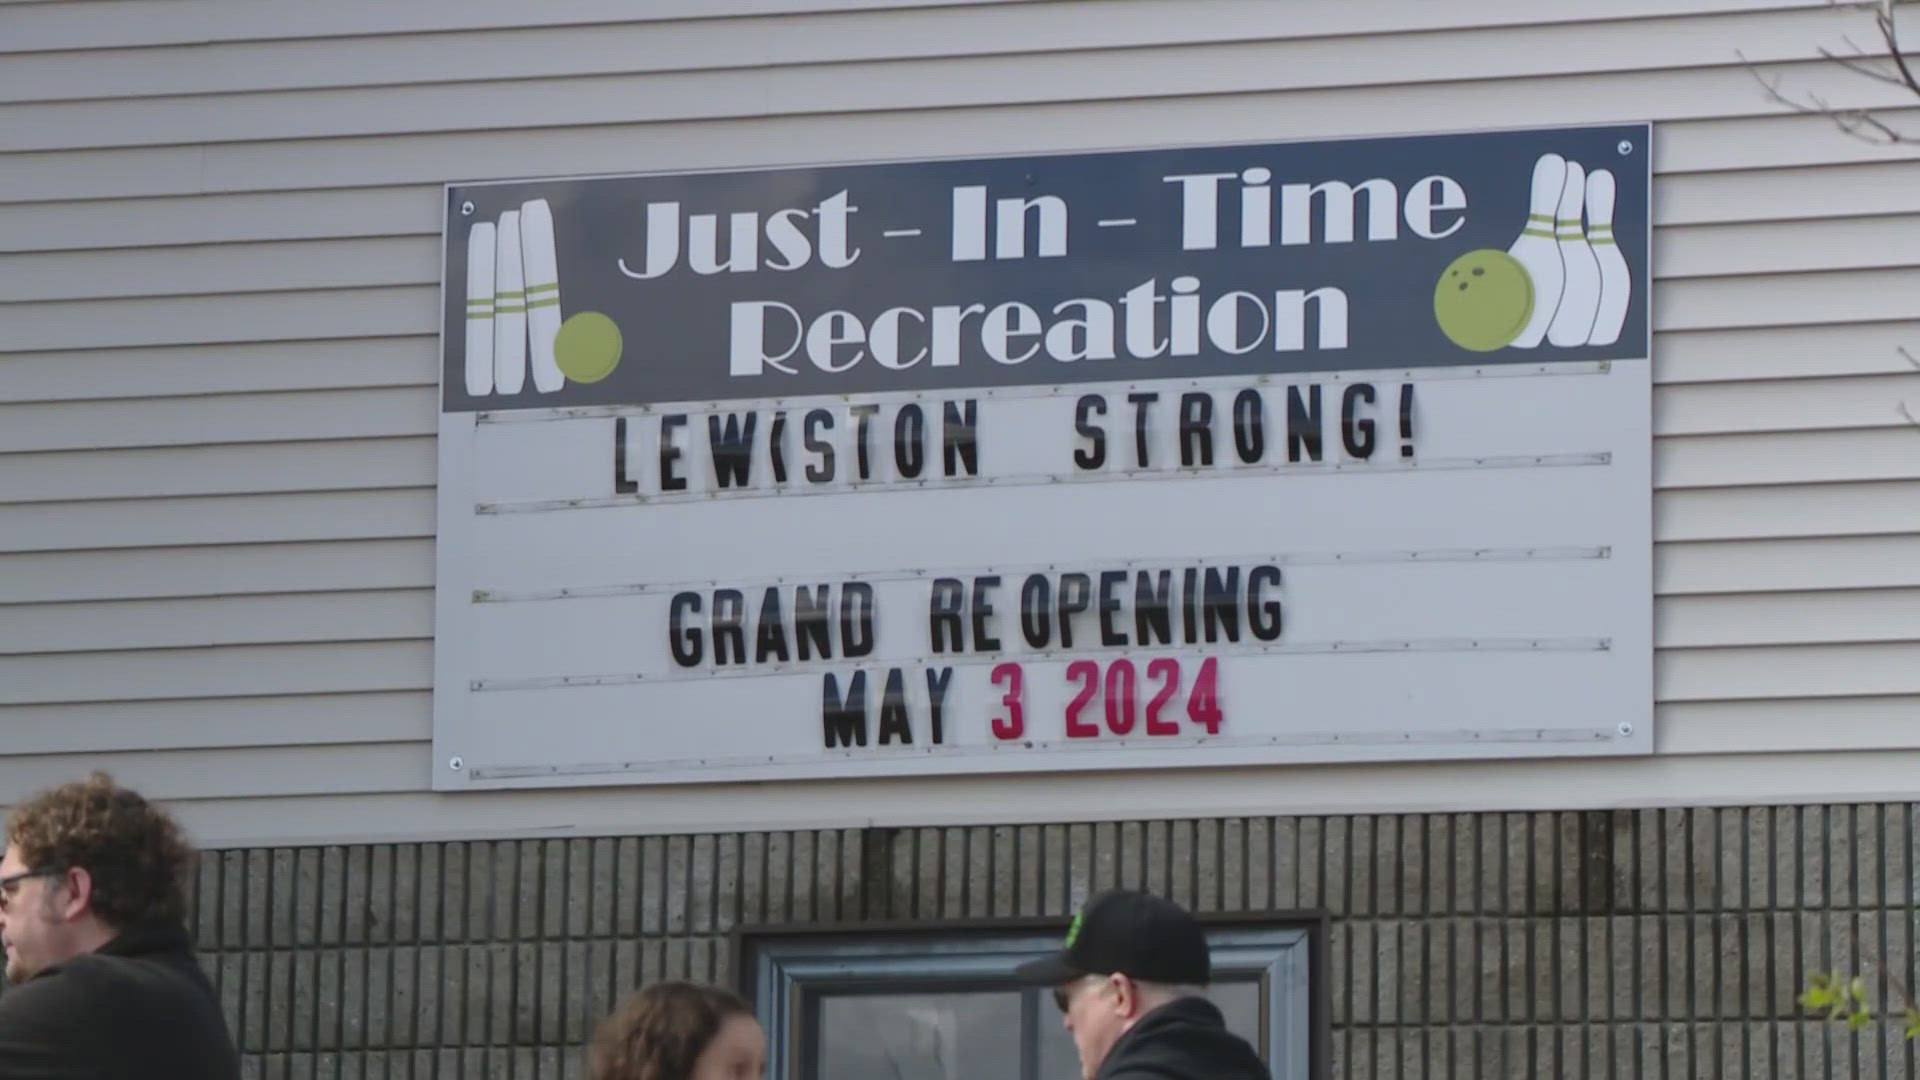 It's a day the Lewiston community and beyond has been waiting for: The grand reopening of Just-In-Time Recreation. One of the sites of the mass shootings in October.